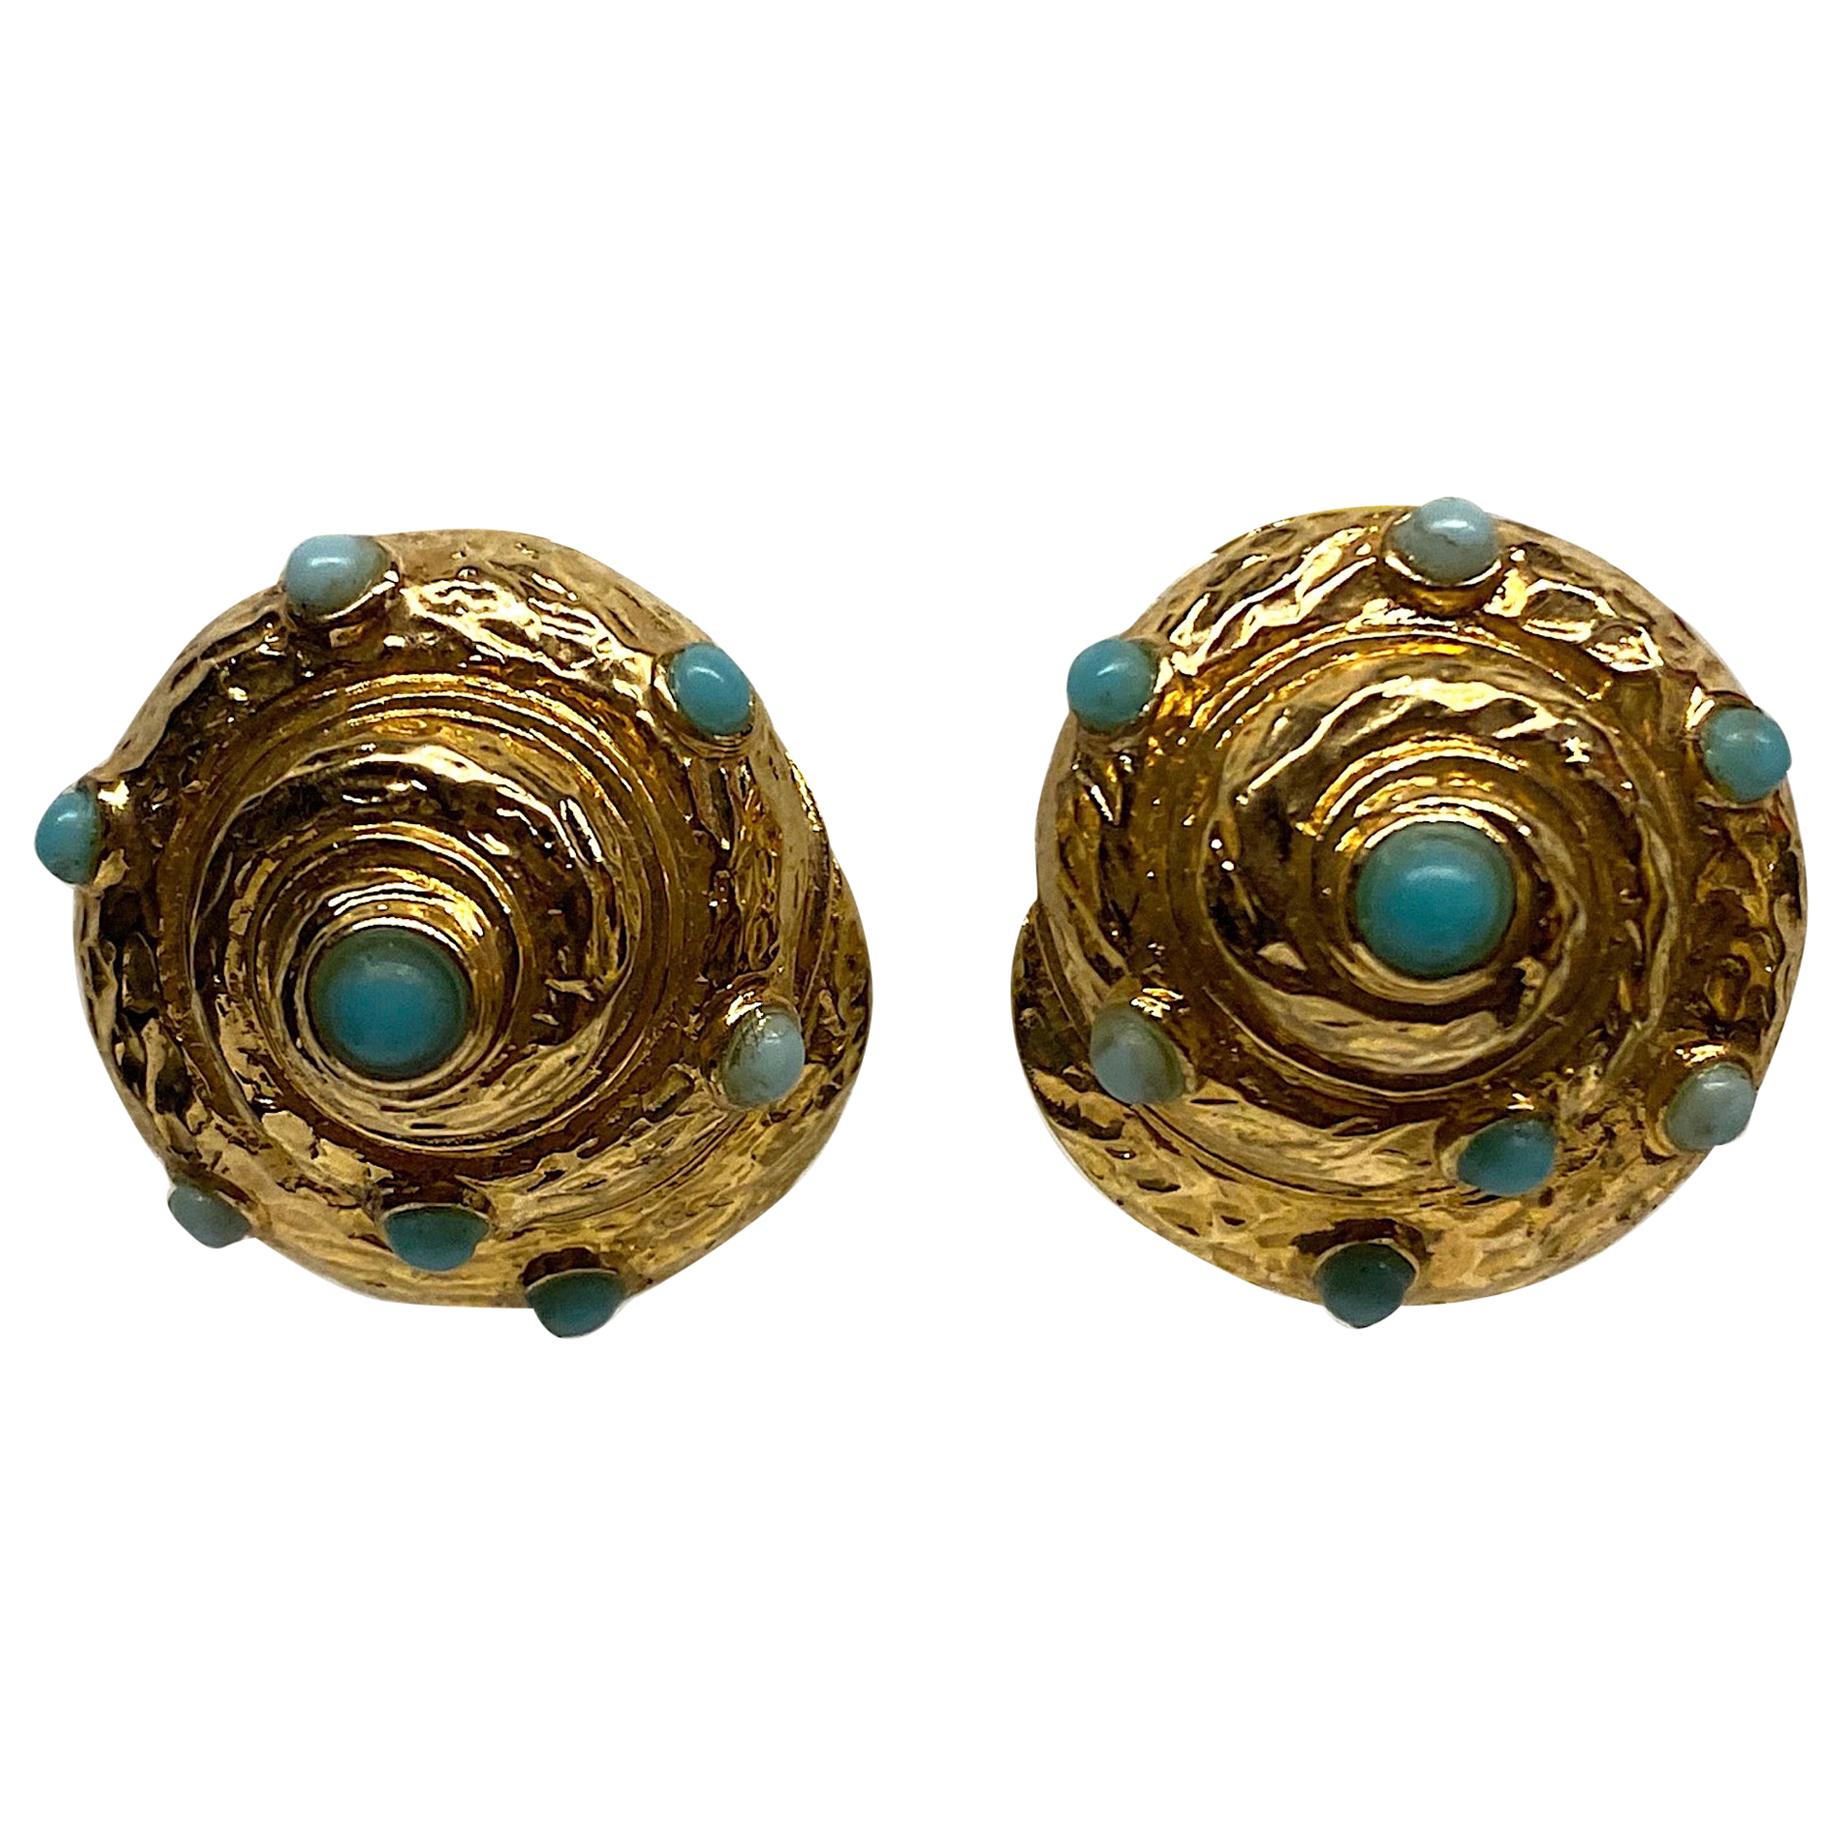 Italian Gold and Turquoise Spiral Sea Shell Earrings